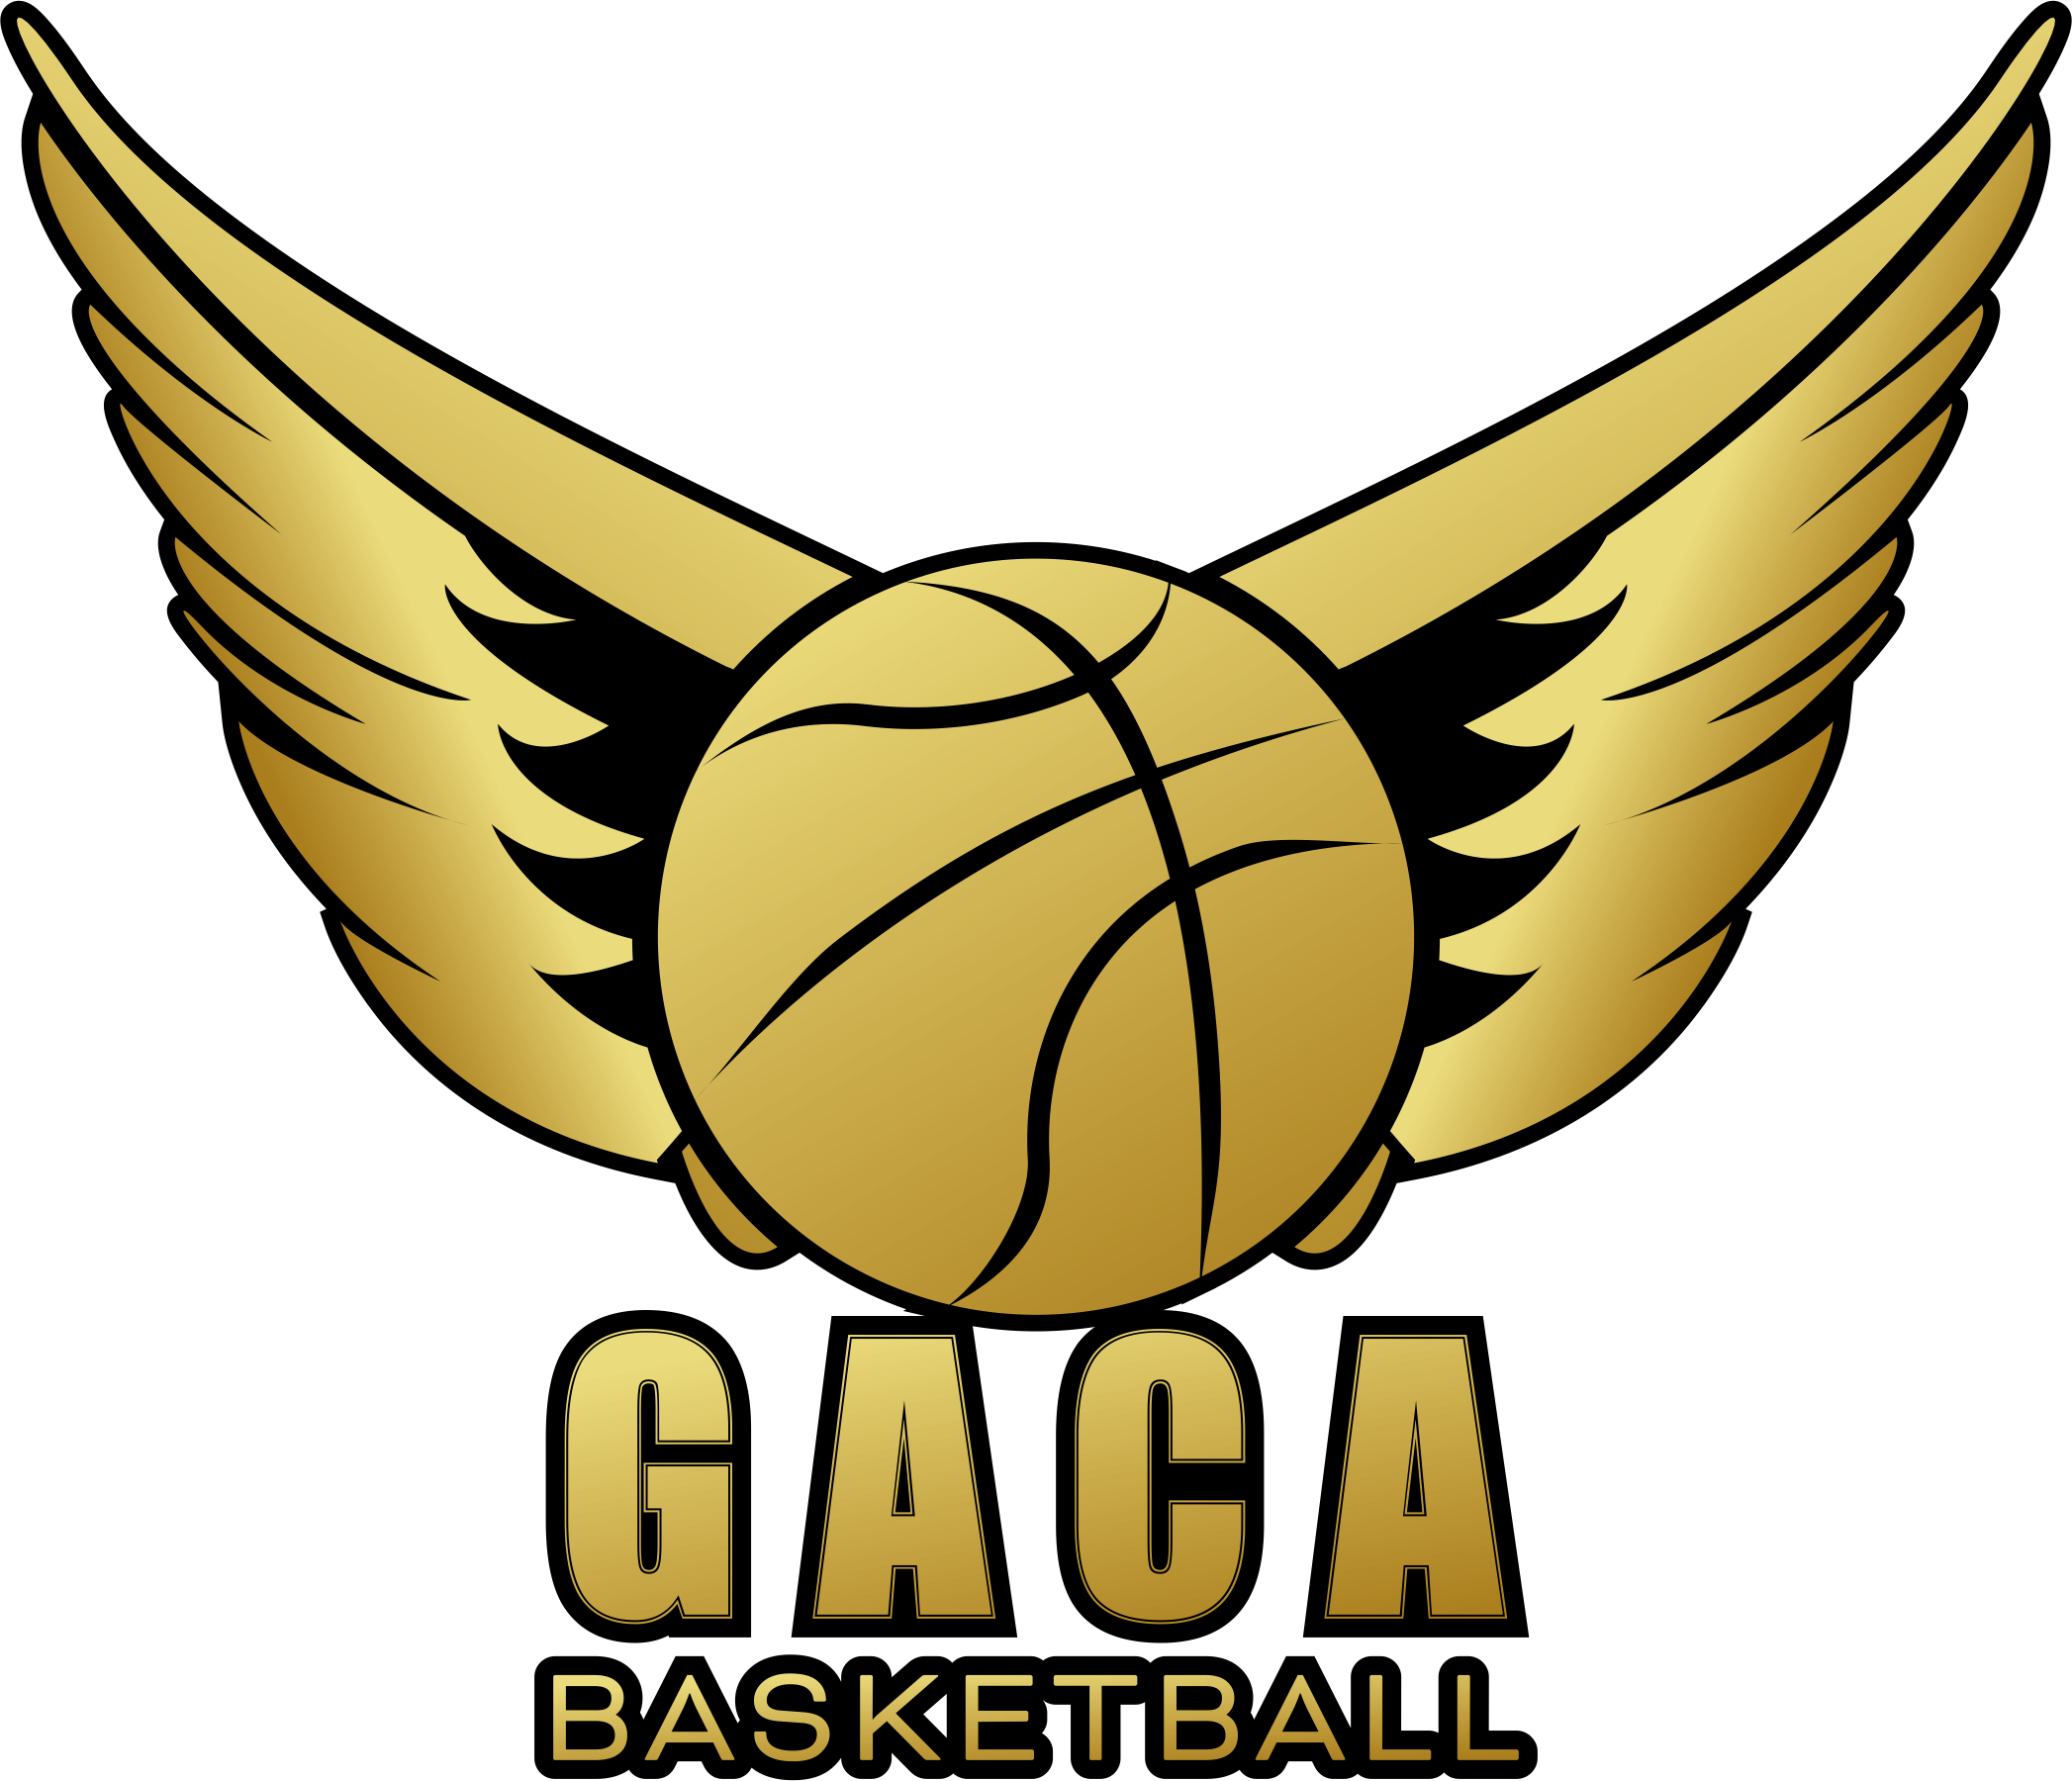 Winter Season Of Basketball Registration To Open By - Winter Season Of Basketball Registration To Open By (2094x1800)